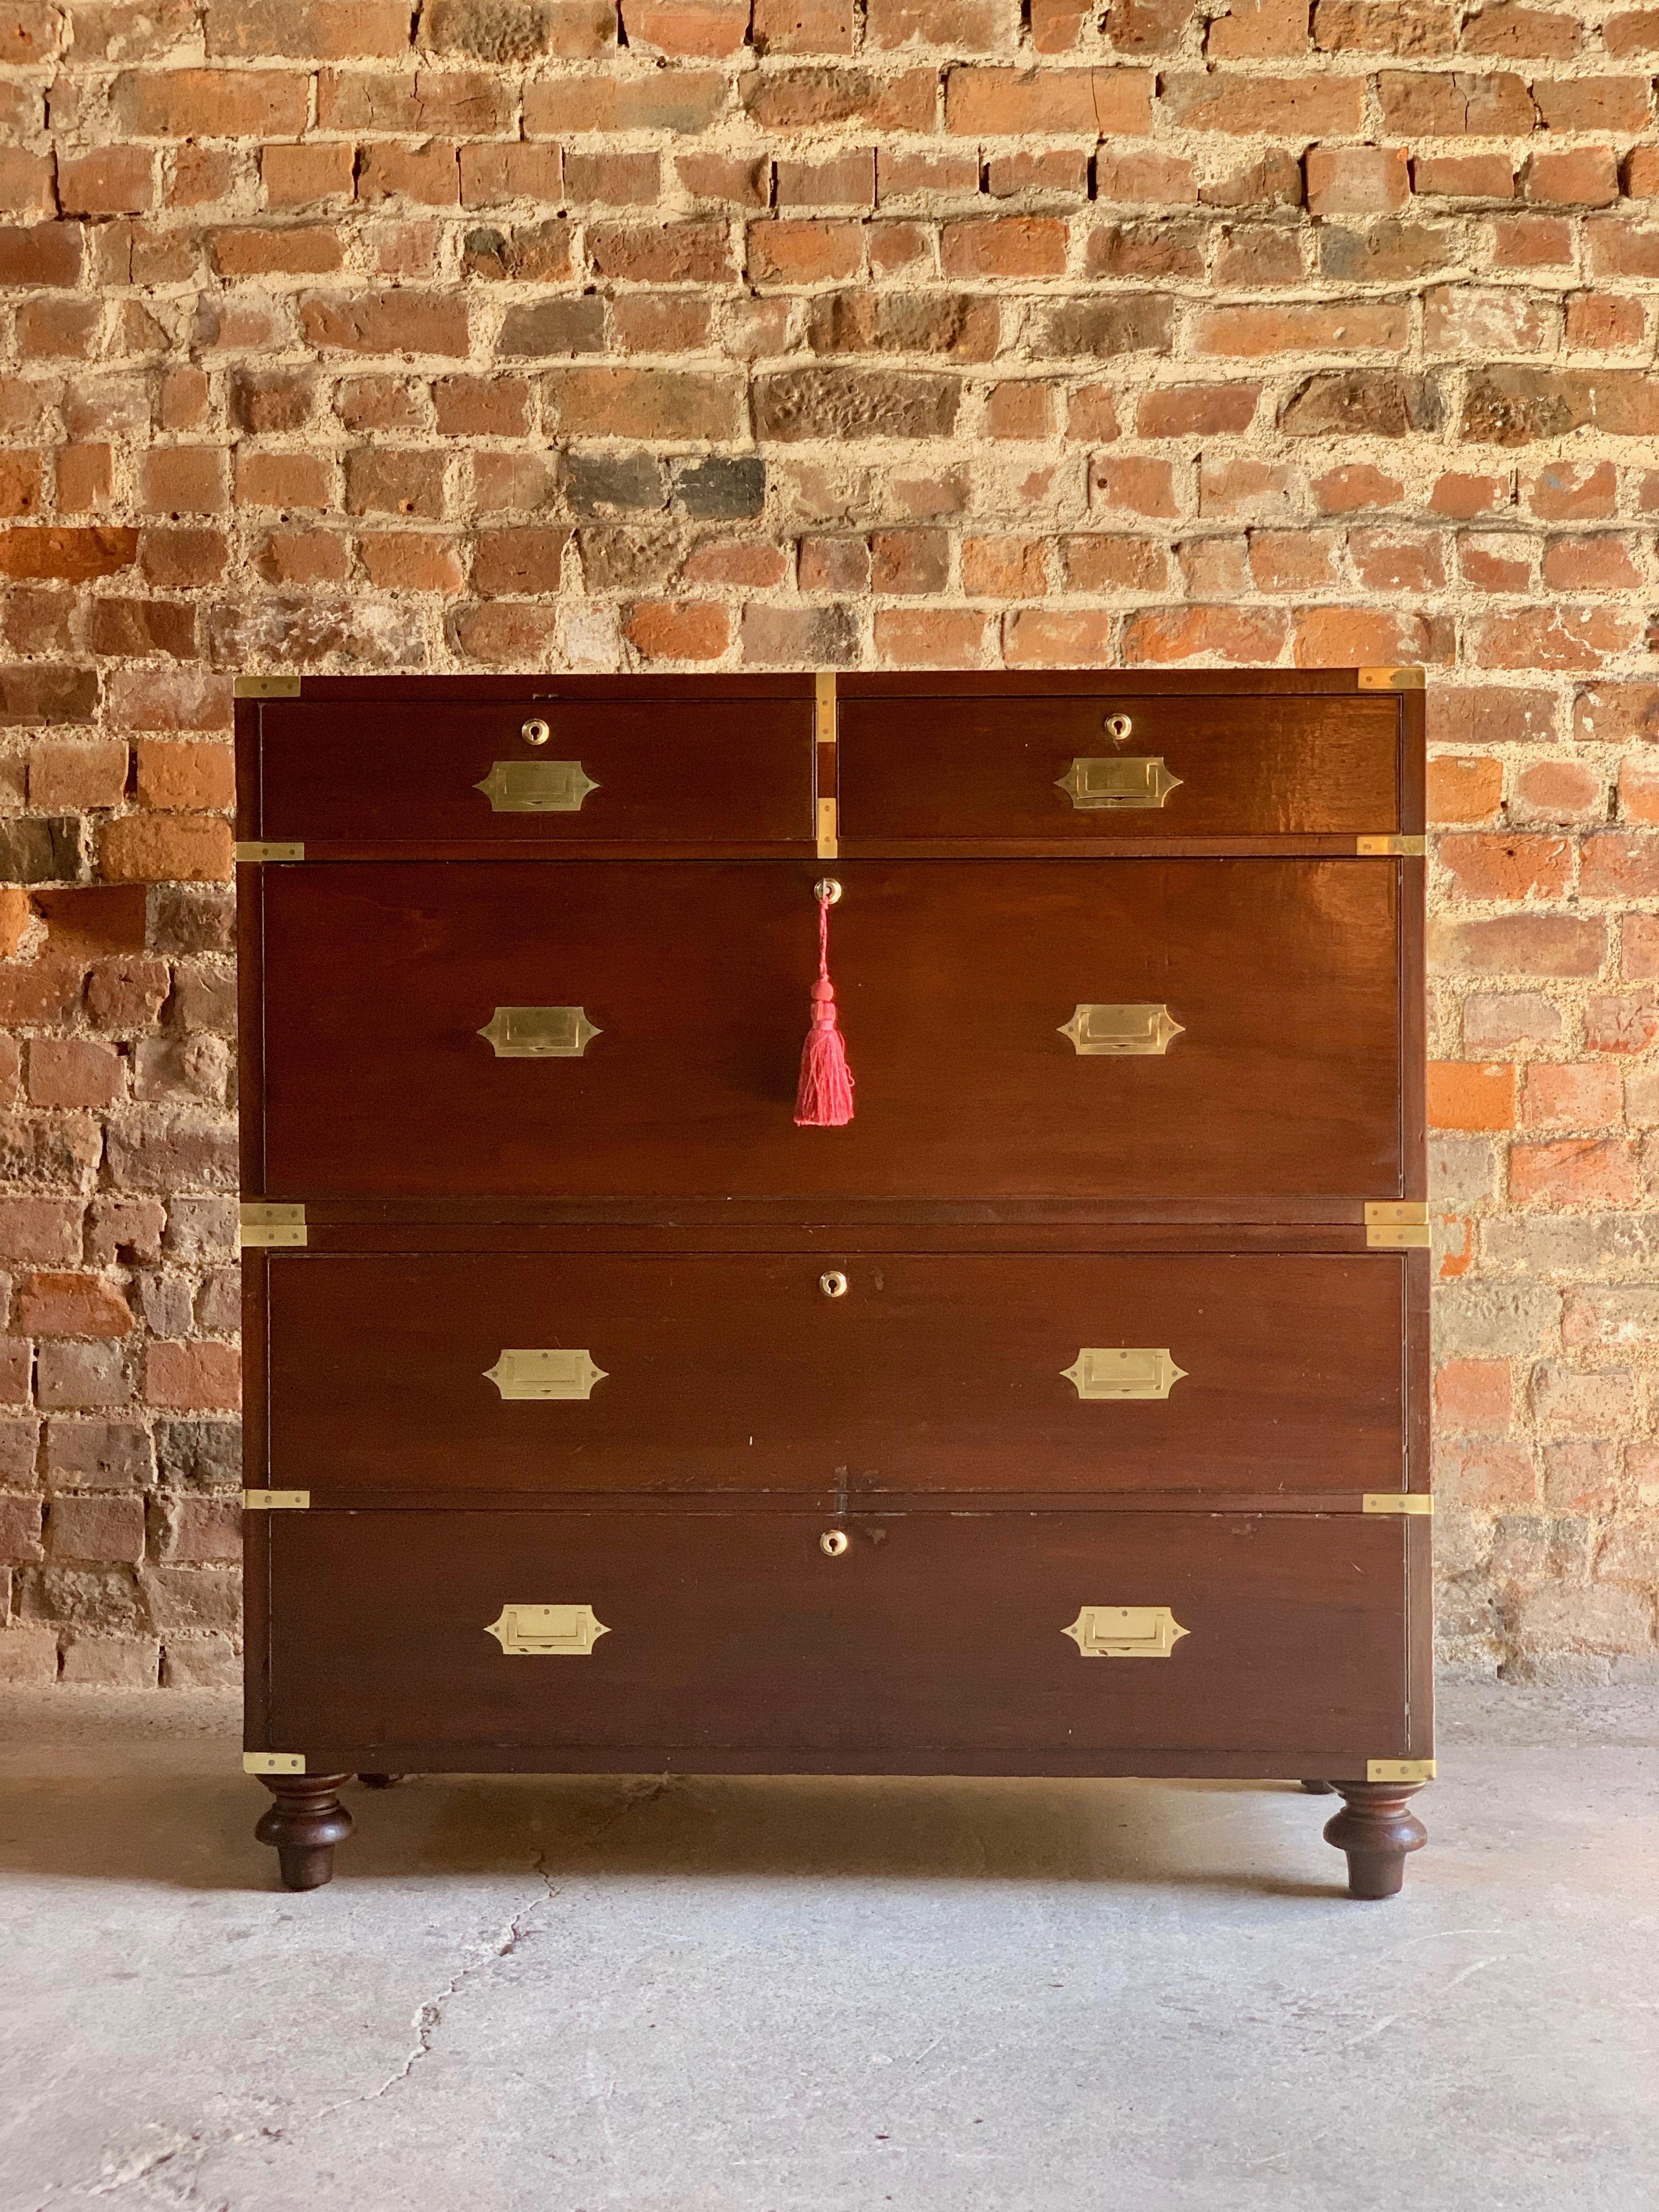 Magnificent William IV Teak Military Campaign chest of drawers (circa 1820) Number 24

Magnificent Antique William IV Teak Military Campaign chest of drawers circa 1820, (Number 24) featuring original flush mounted diamond shaped brass handles and